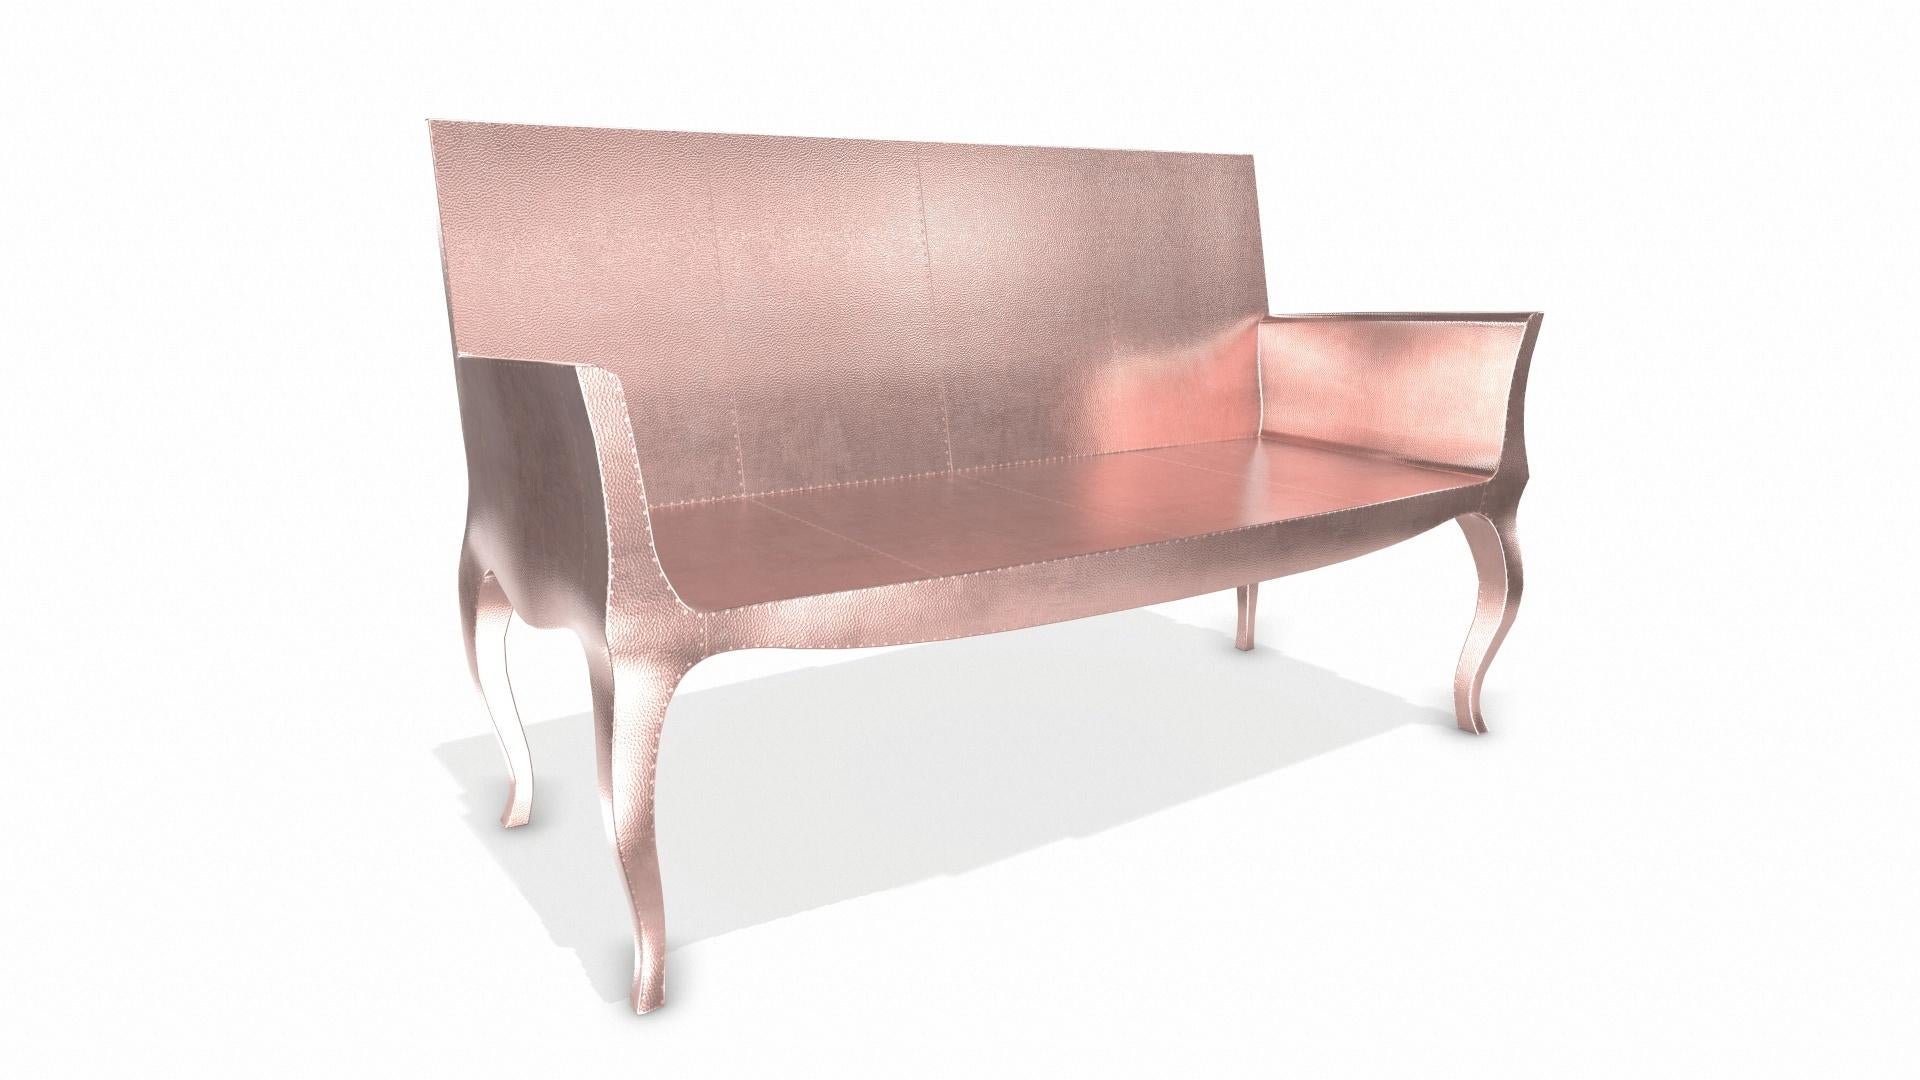 Contemporary Louise Settee Art Deco Canapes in Mid. Hammered Copper by Paul Mathieu For Sale